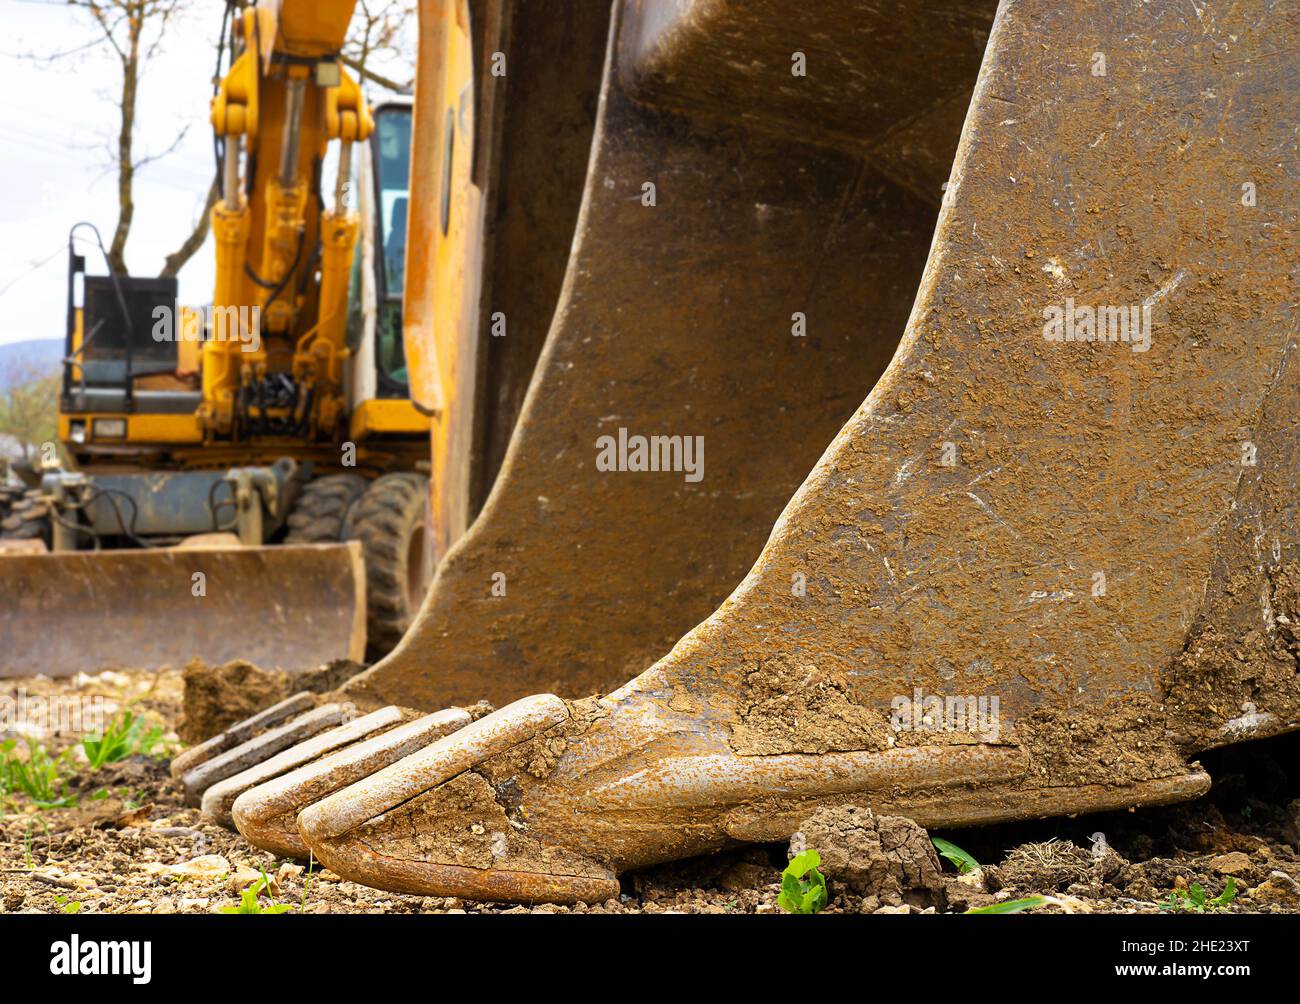 excavator machine with a bucket touching the ground in front. Stock Photo